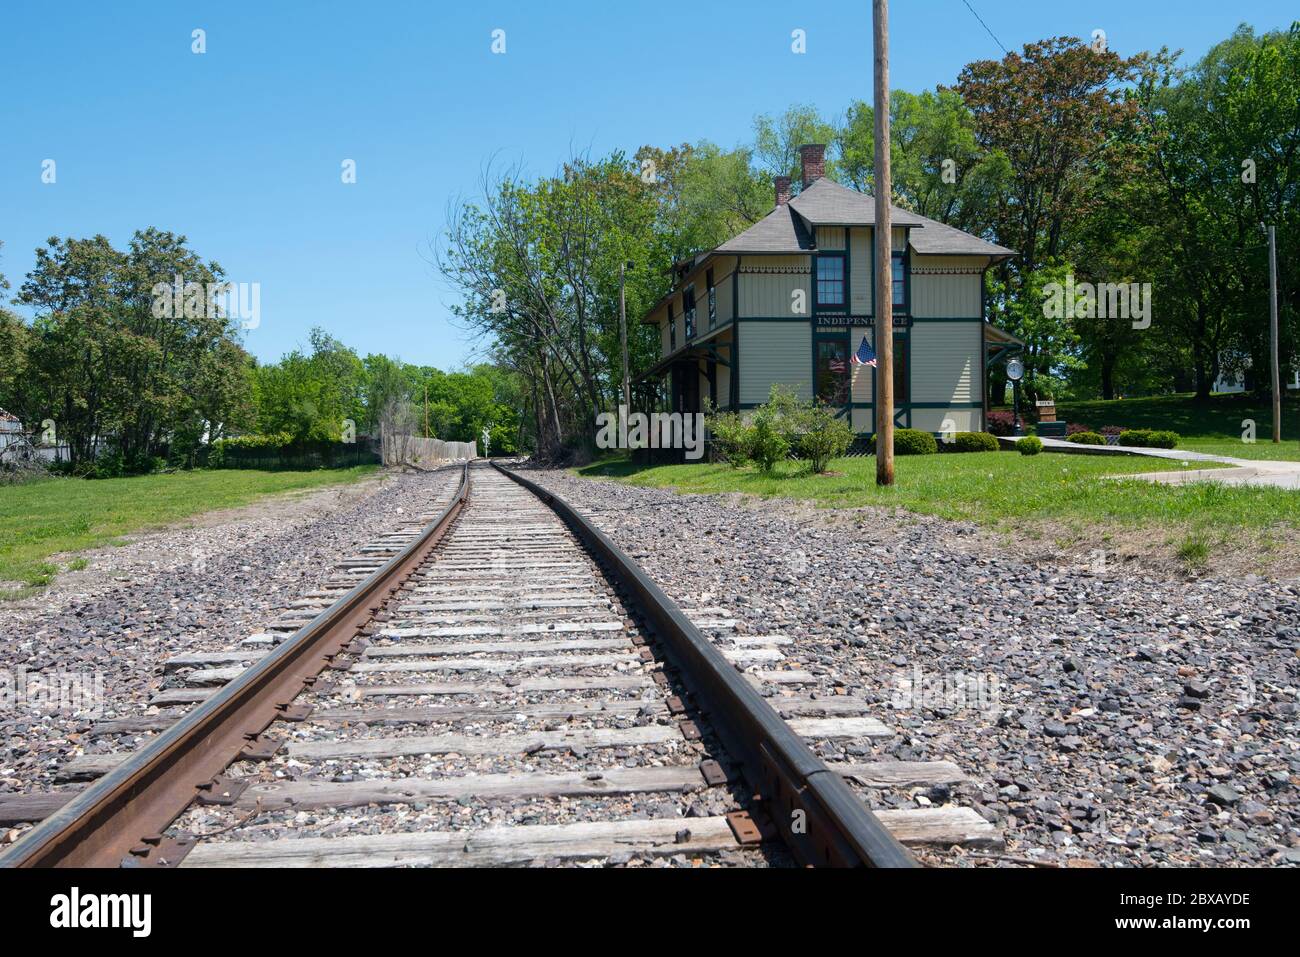 A low level view of a single track railway line on a sunny day, with the Chicago and Alton Railroad Depot building on the right hand side Stock Photo